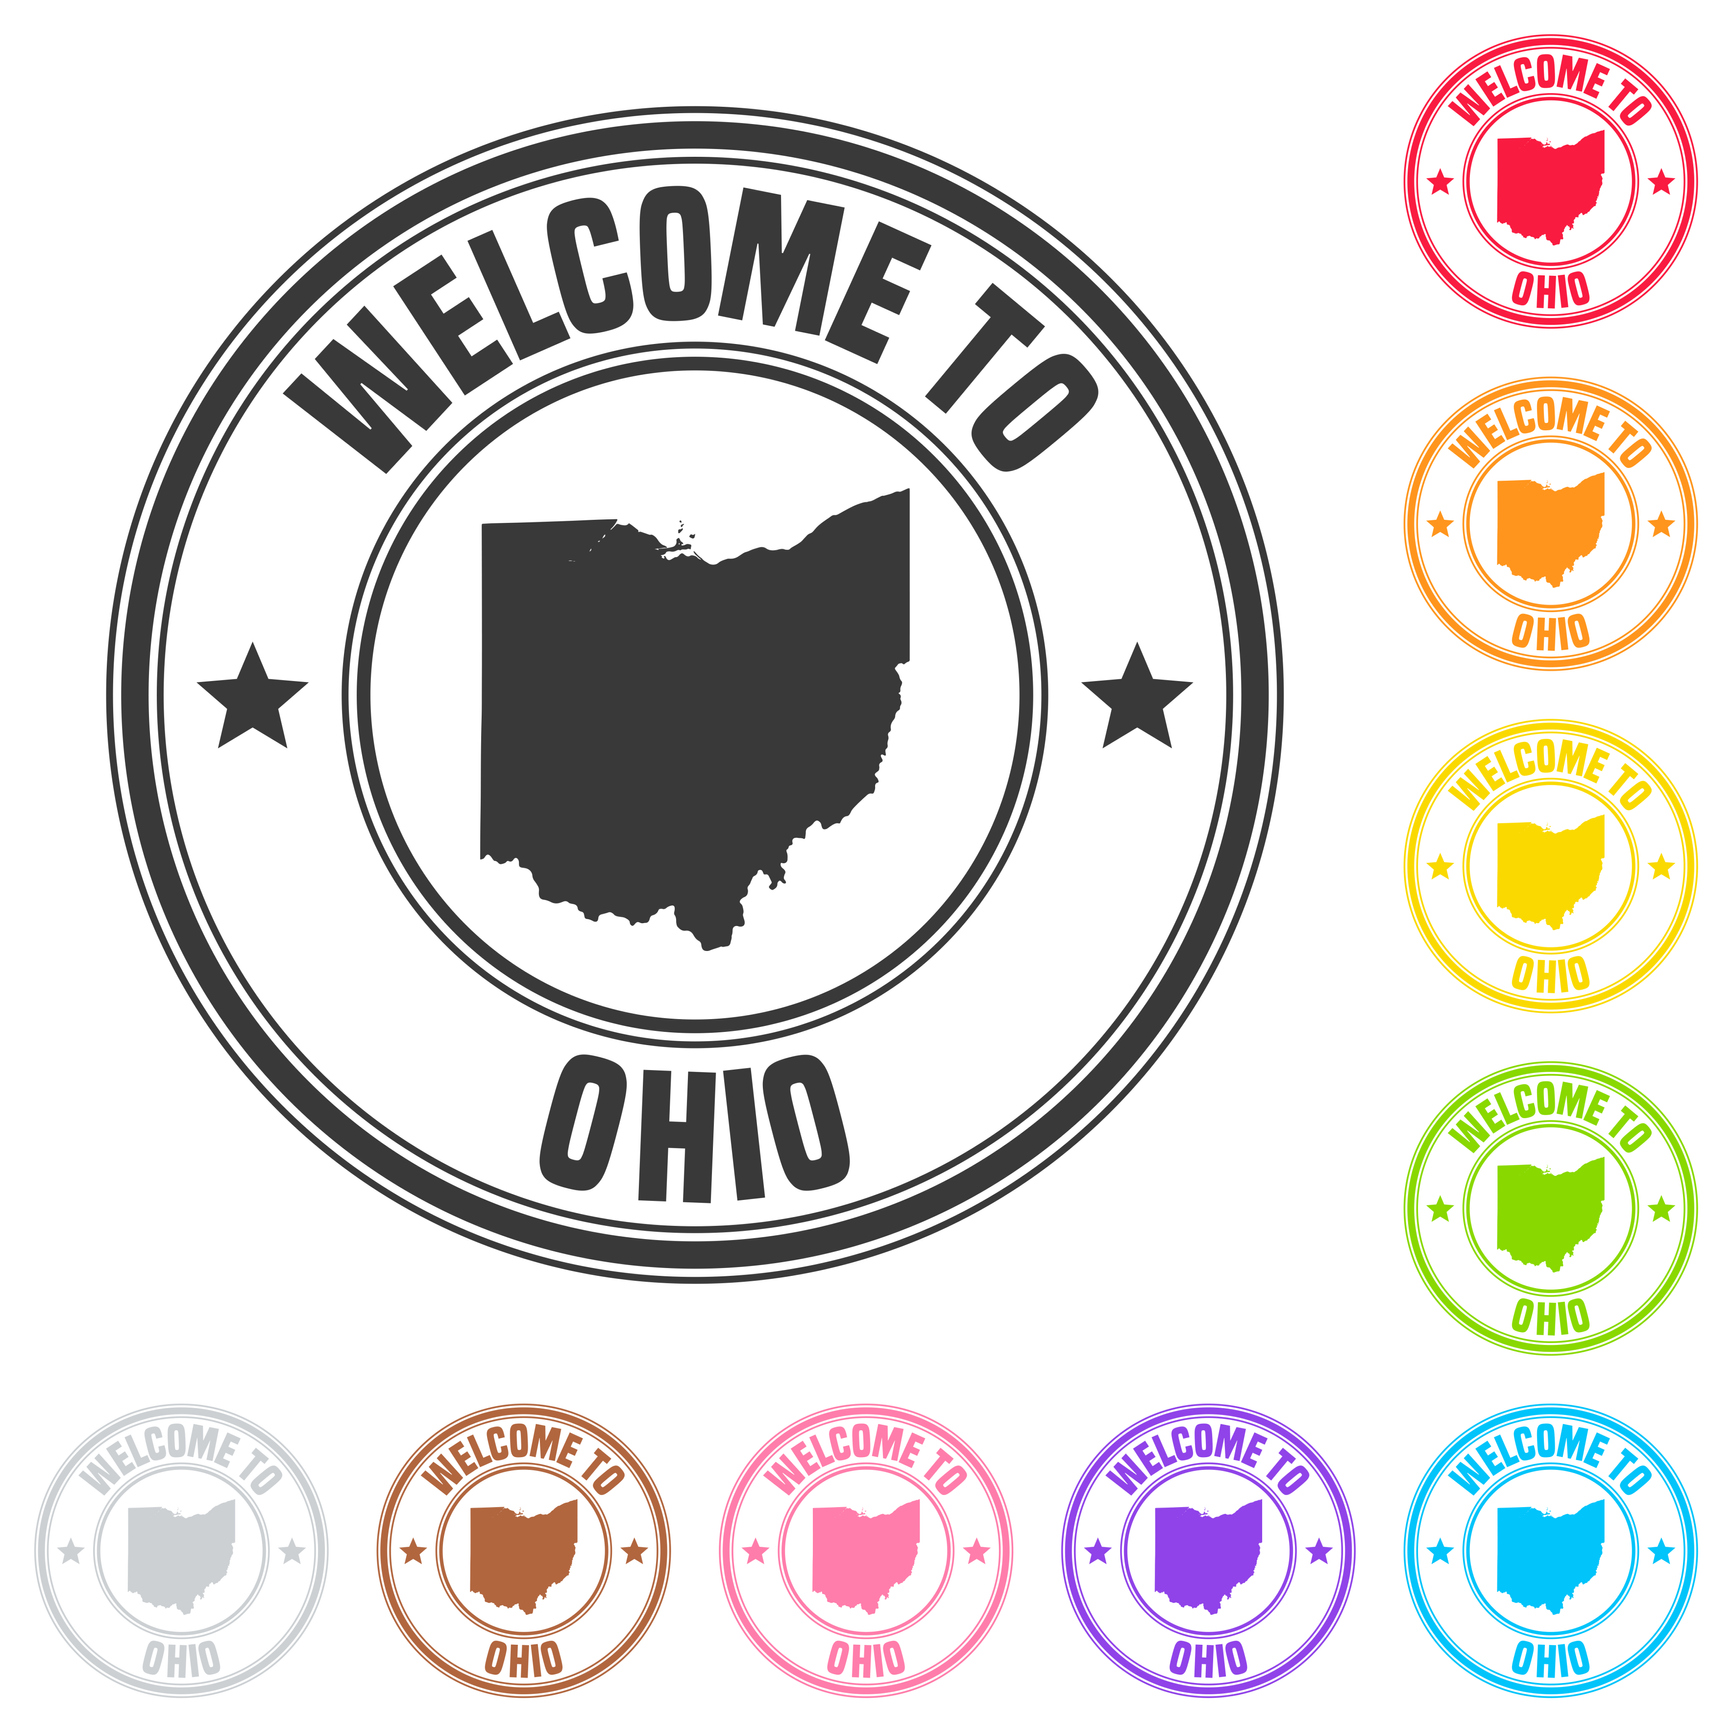 Welcome to Ohio stamp - Colorful badges on white background